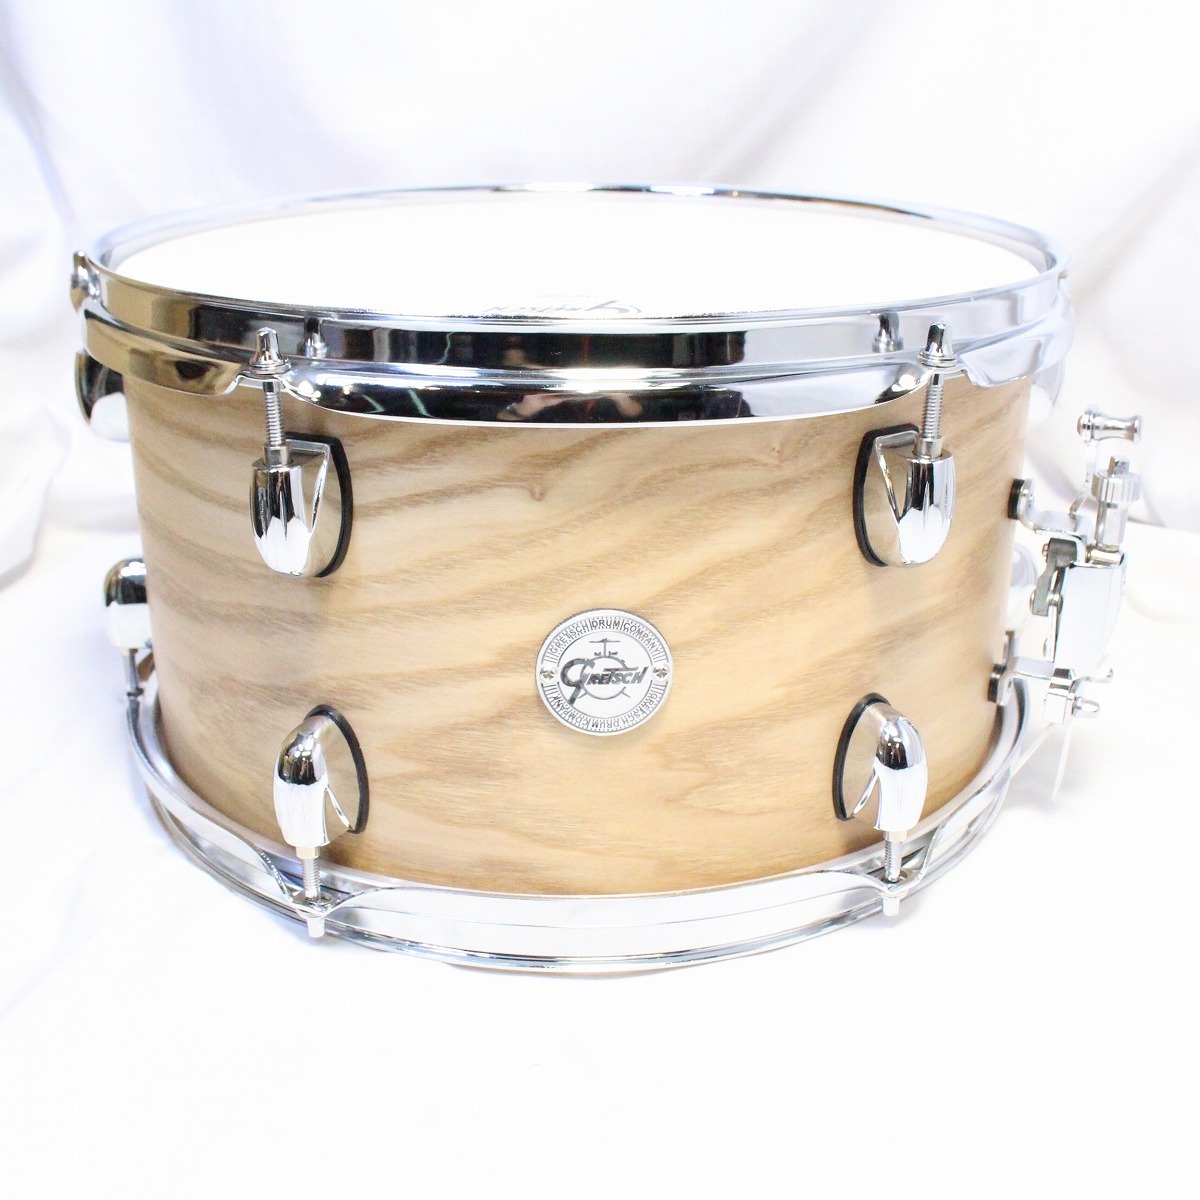 Gretsch S1-0713-ASHSN 13x7 Full Range Snare Drums Ash Snare